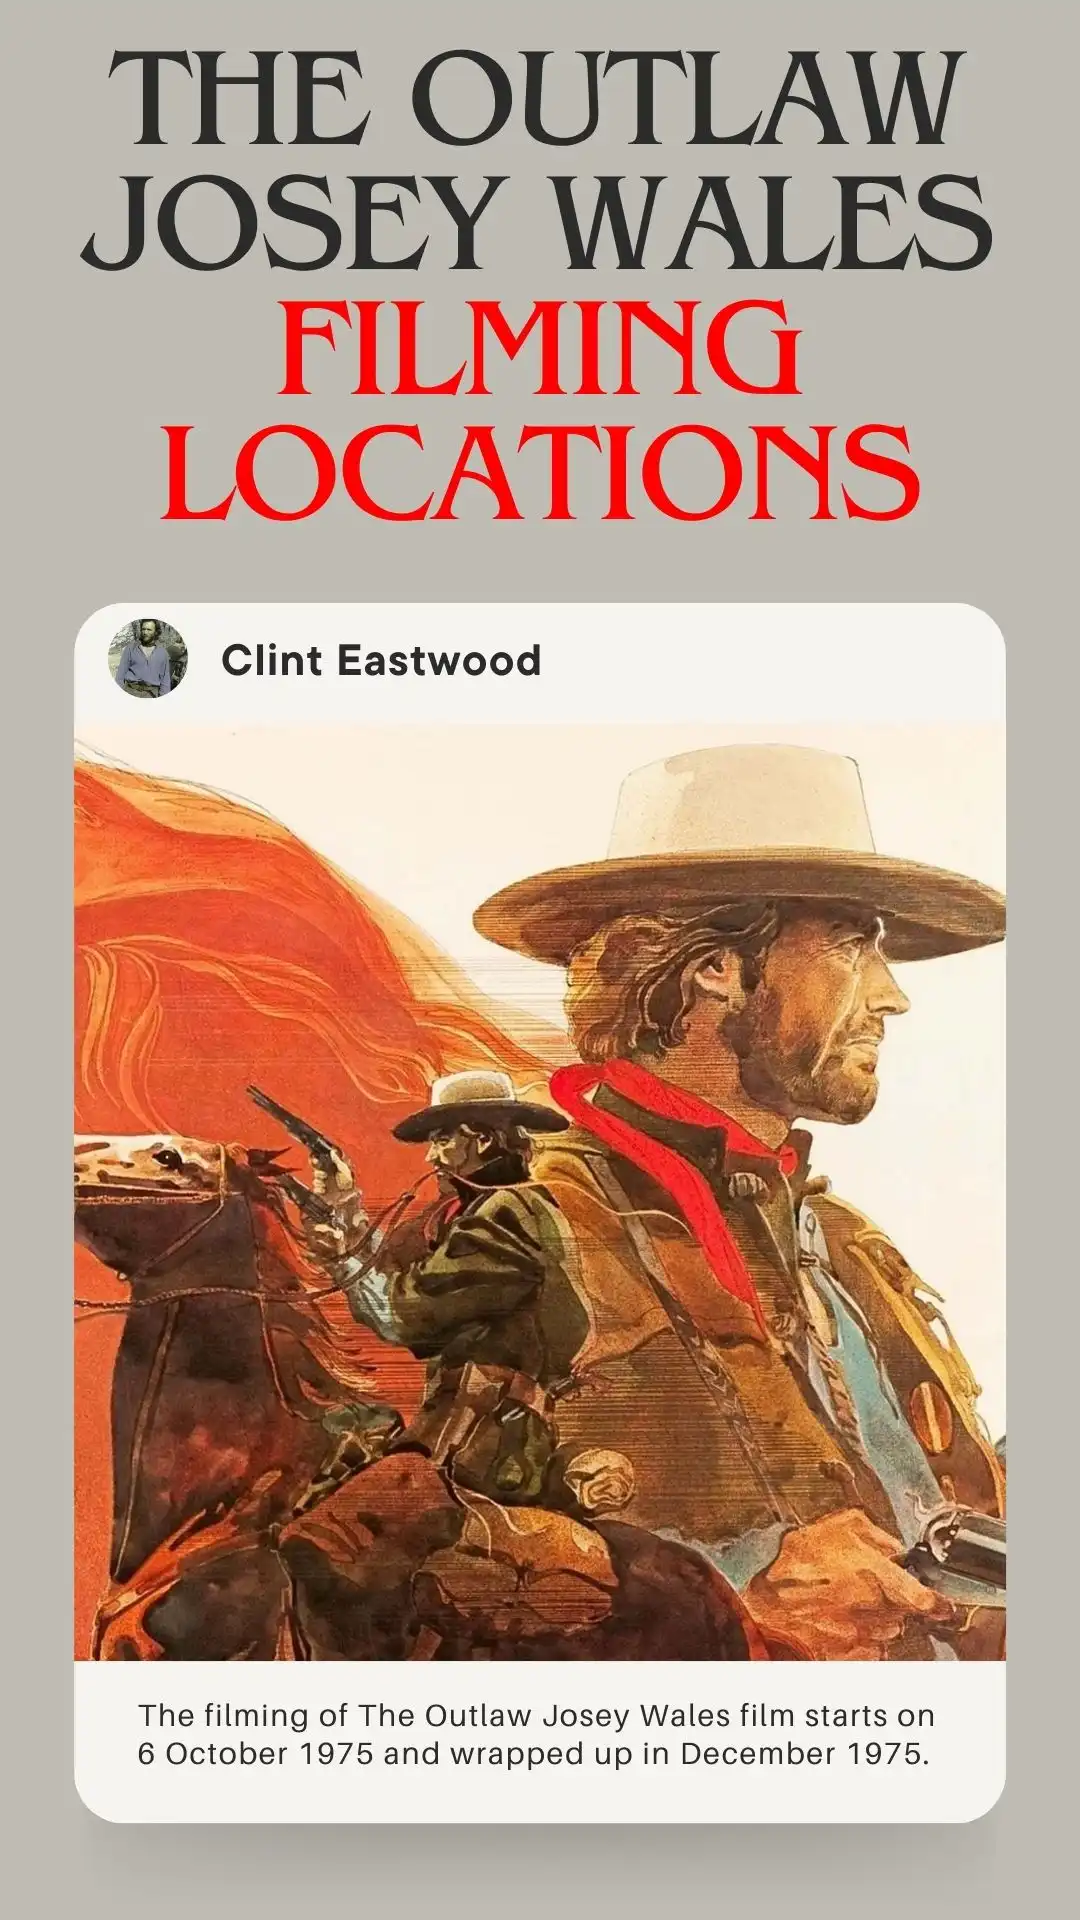 The Outlaw Josey Wales Filming Locations